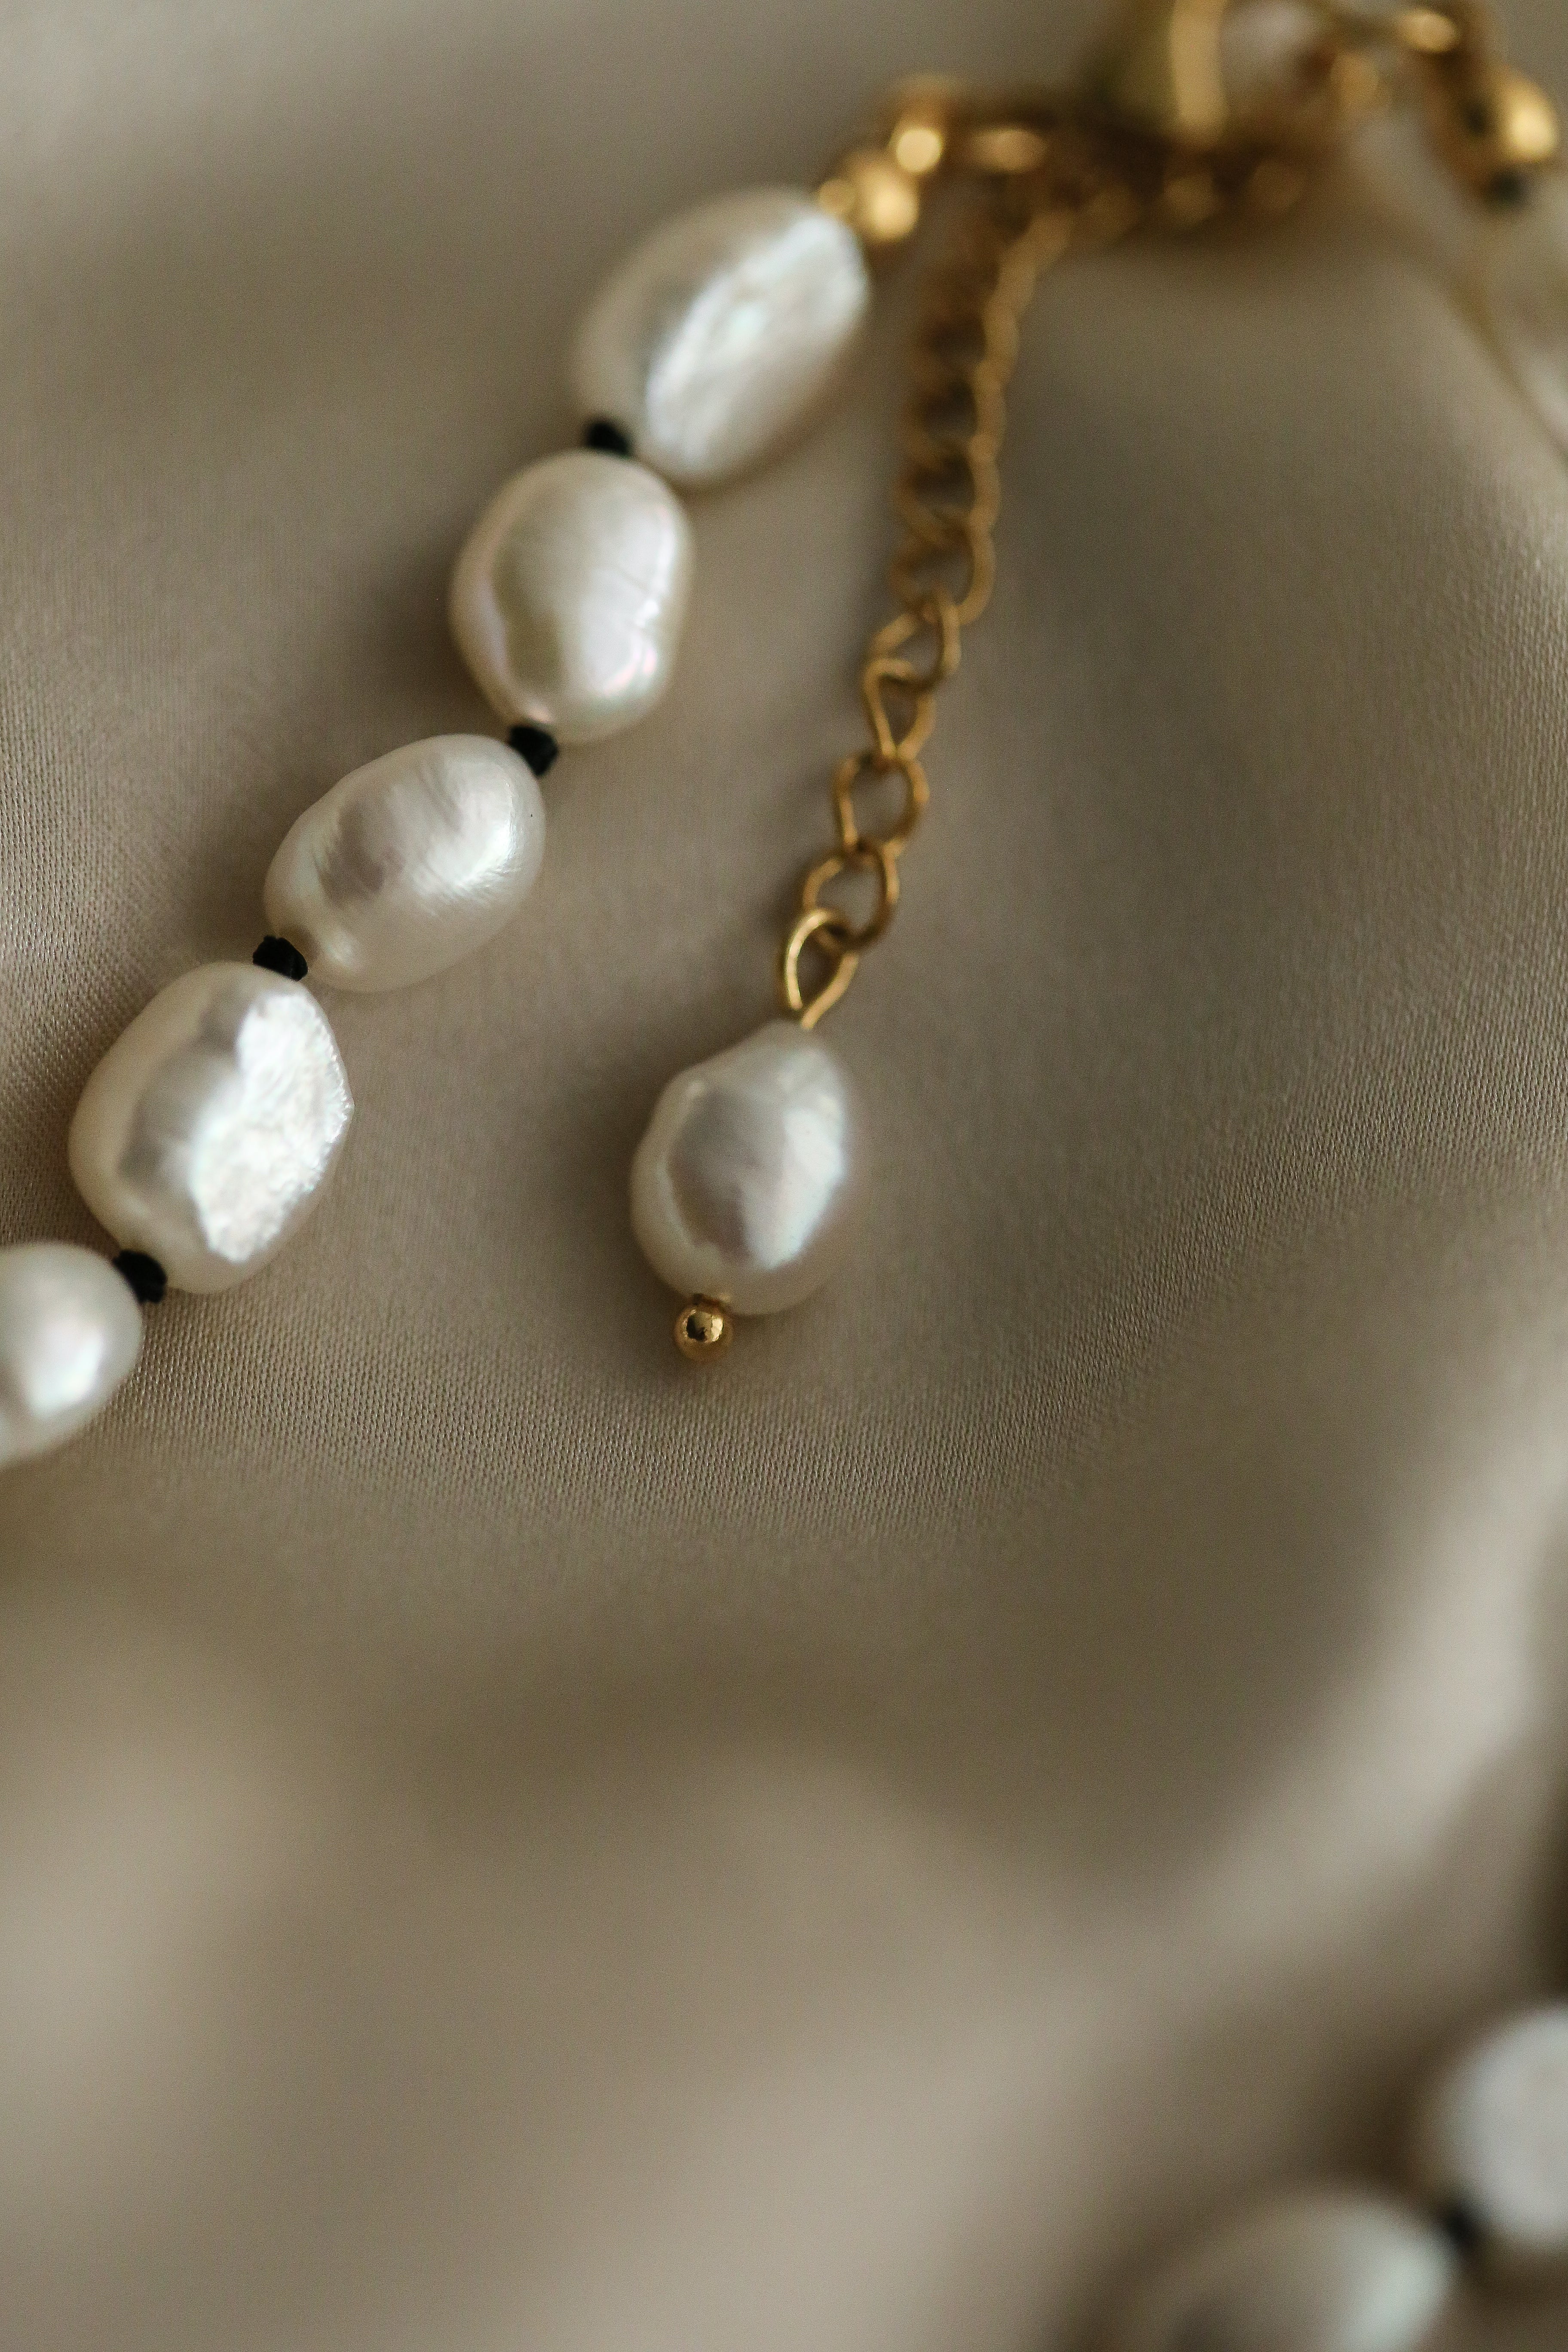 Ora Necklace - Boutique Minimaliste has waterproof, durable, elegant and vintage inspired jewelry